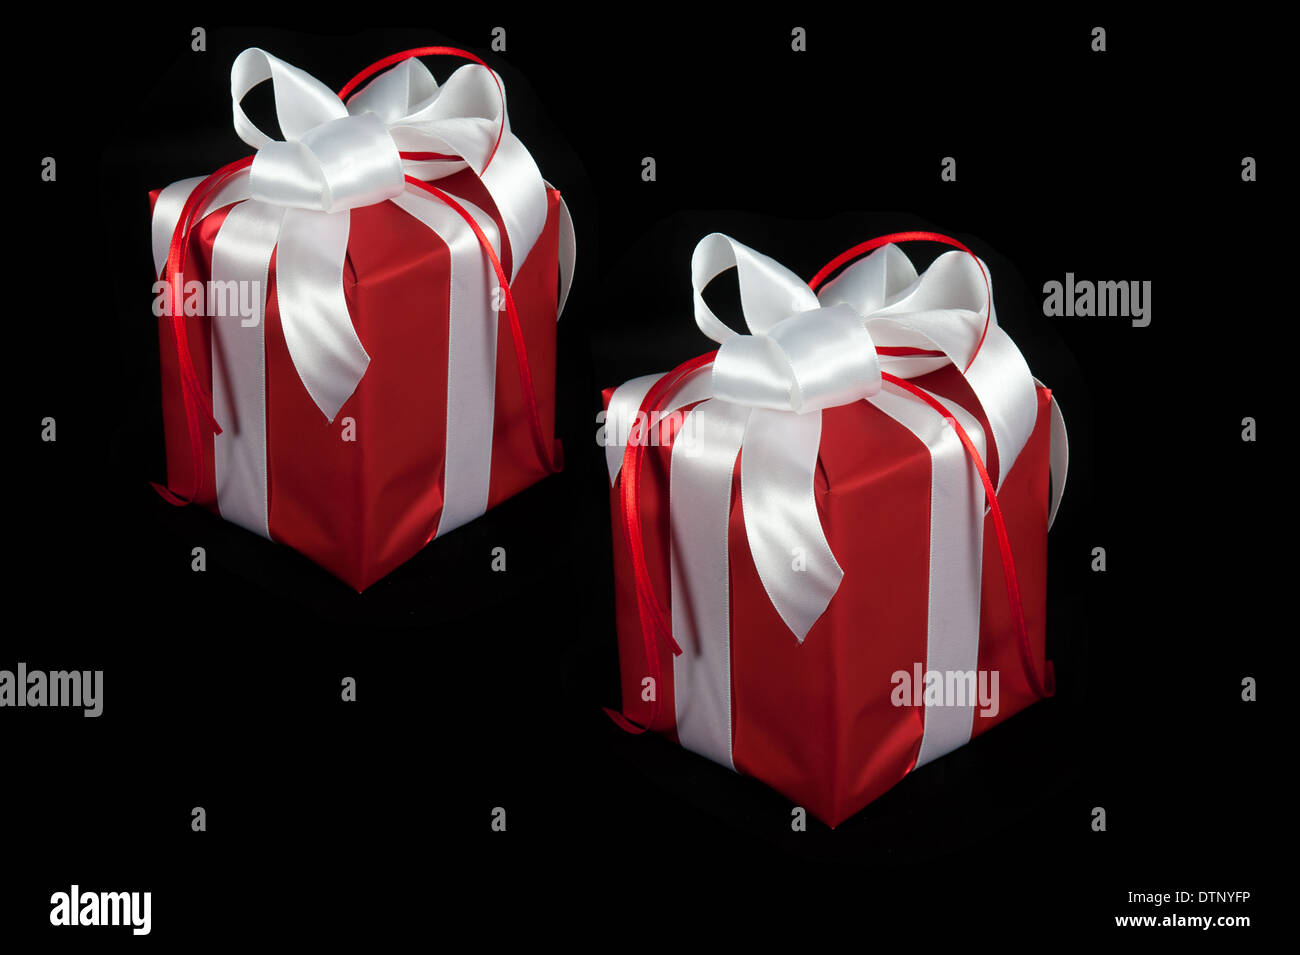 Elegant black Christmas theme. Wrapped gifts in black matte paper